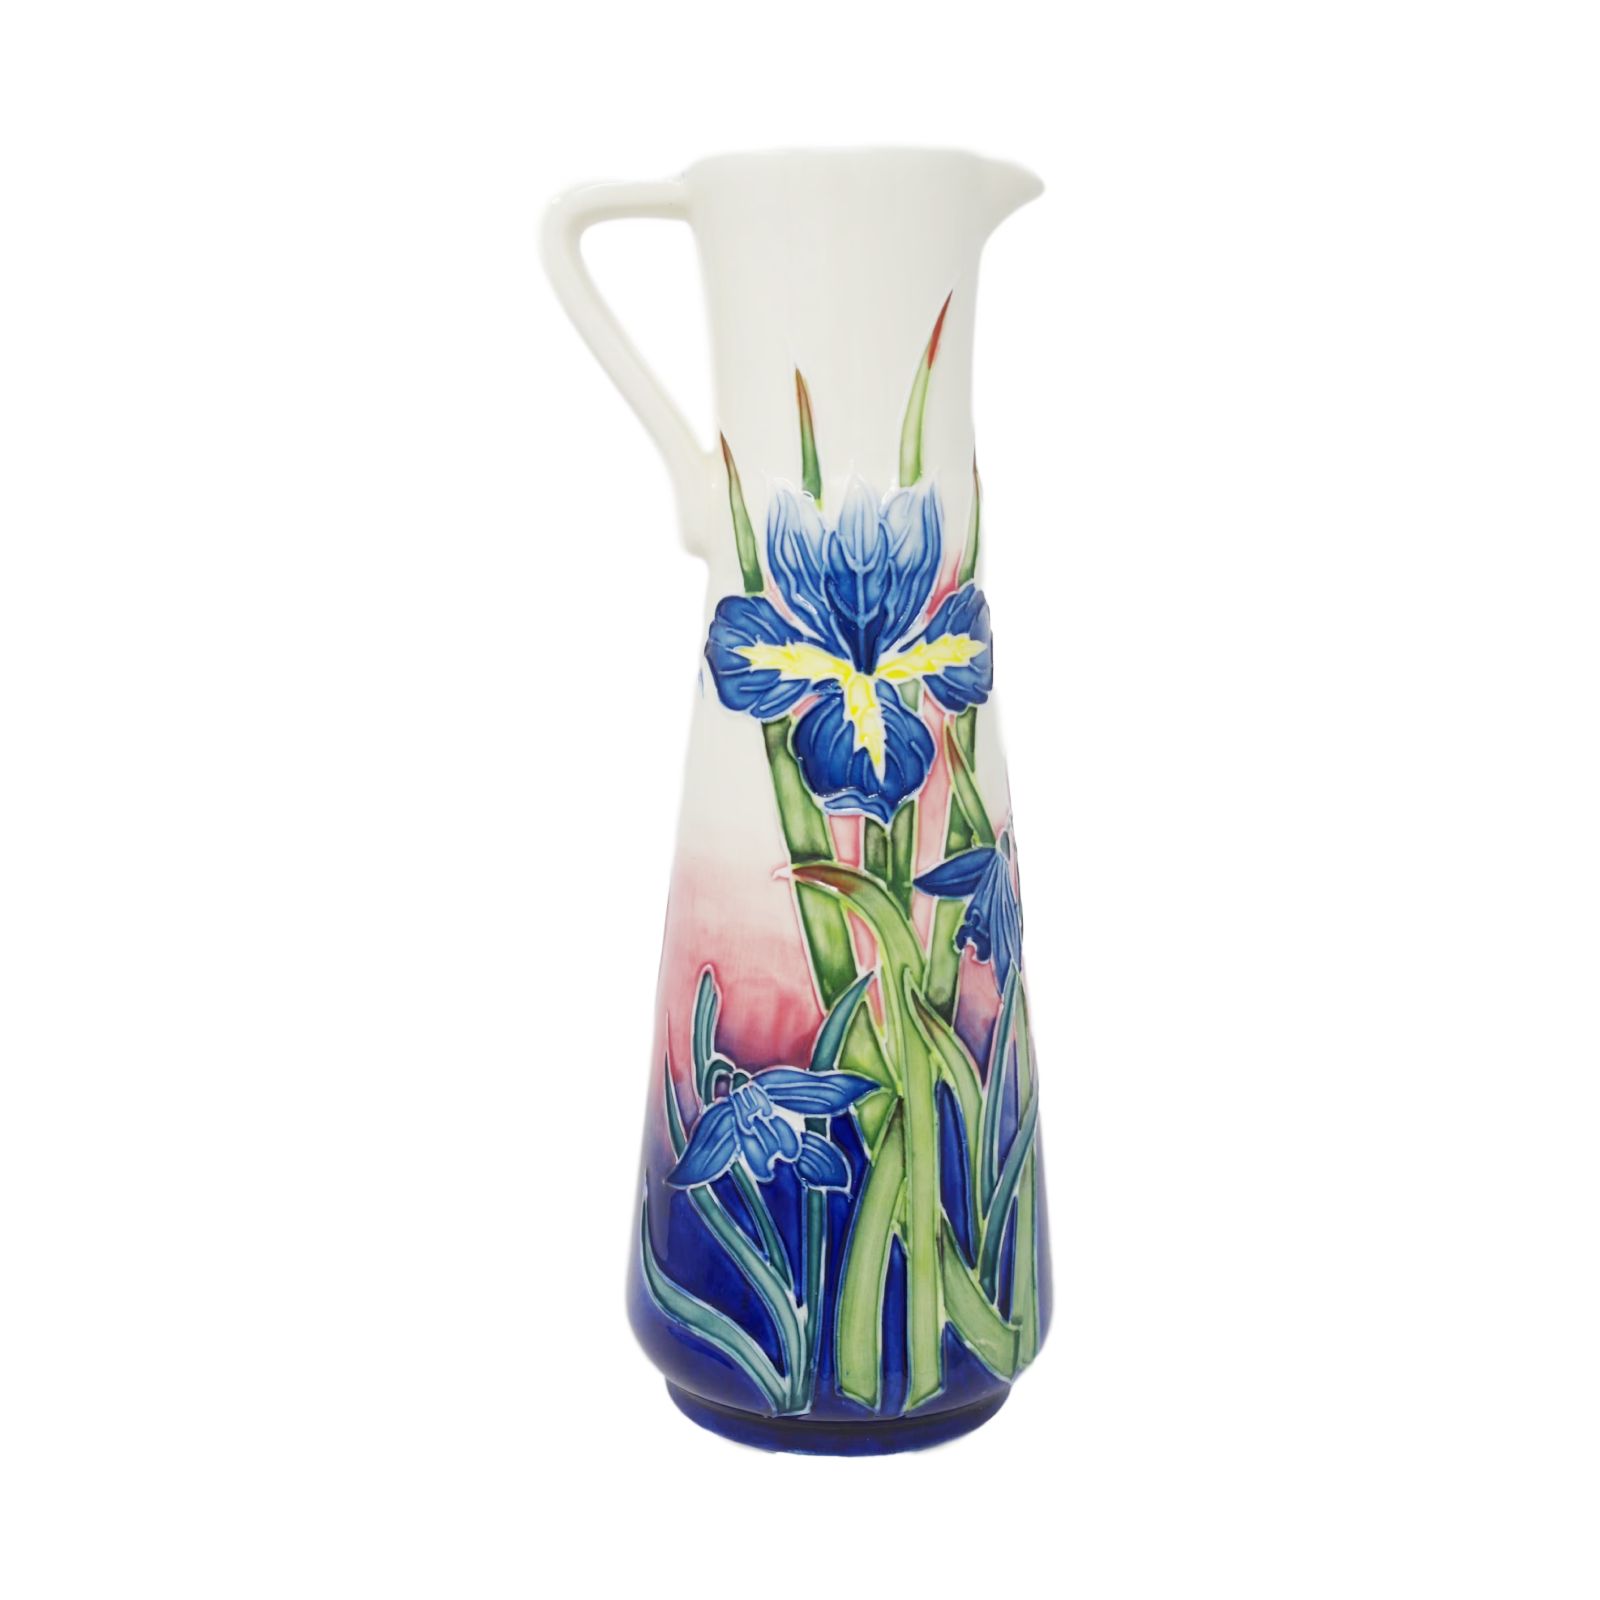 slim pitcher vase tube lining and hand painted blue iris flower on sides